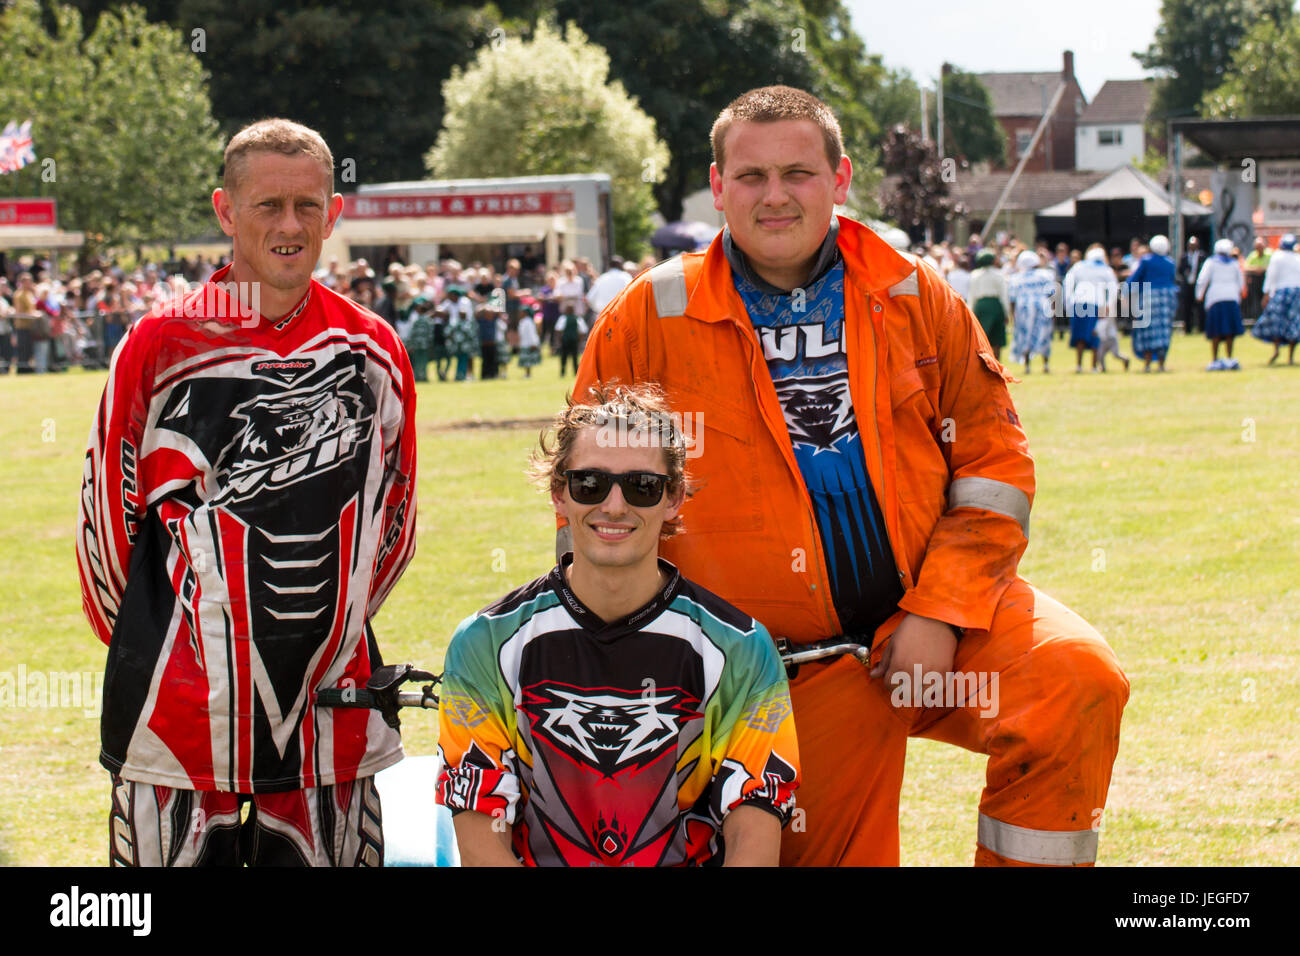 South Derbyshire, UK. 24th Jun, 2017. International Stunt Riders, The Team, The Festival of Leisure South Derbyshire Credit: Chris Walls/Alamy Live News Stock Photo